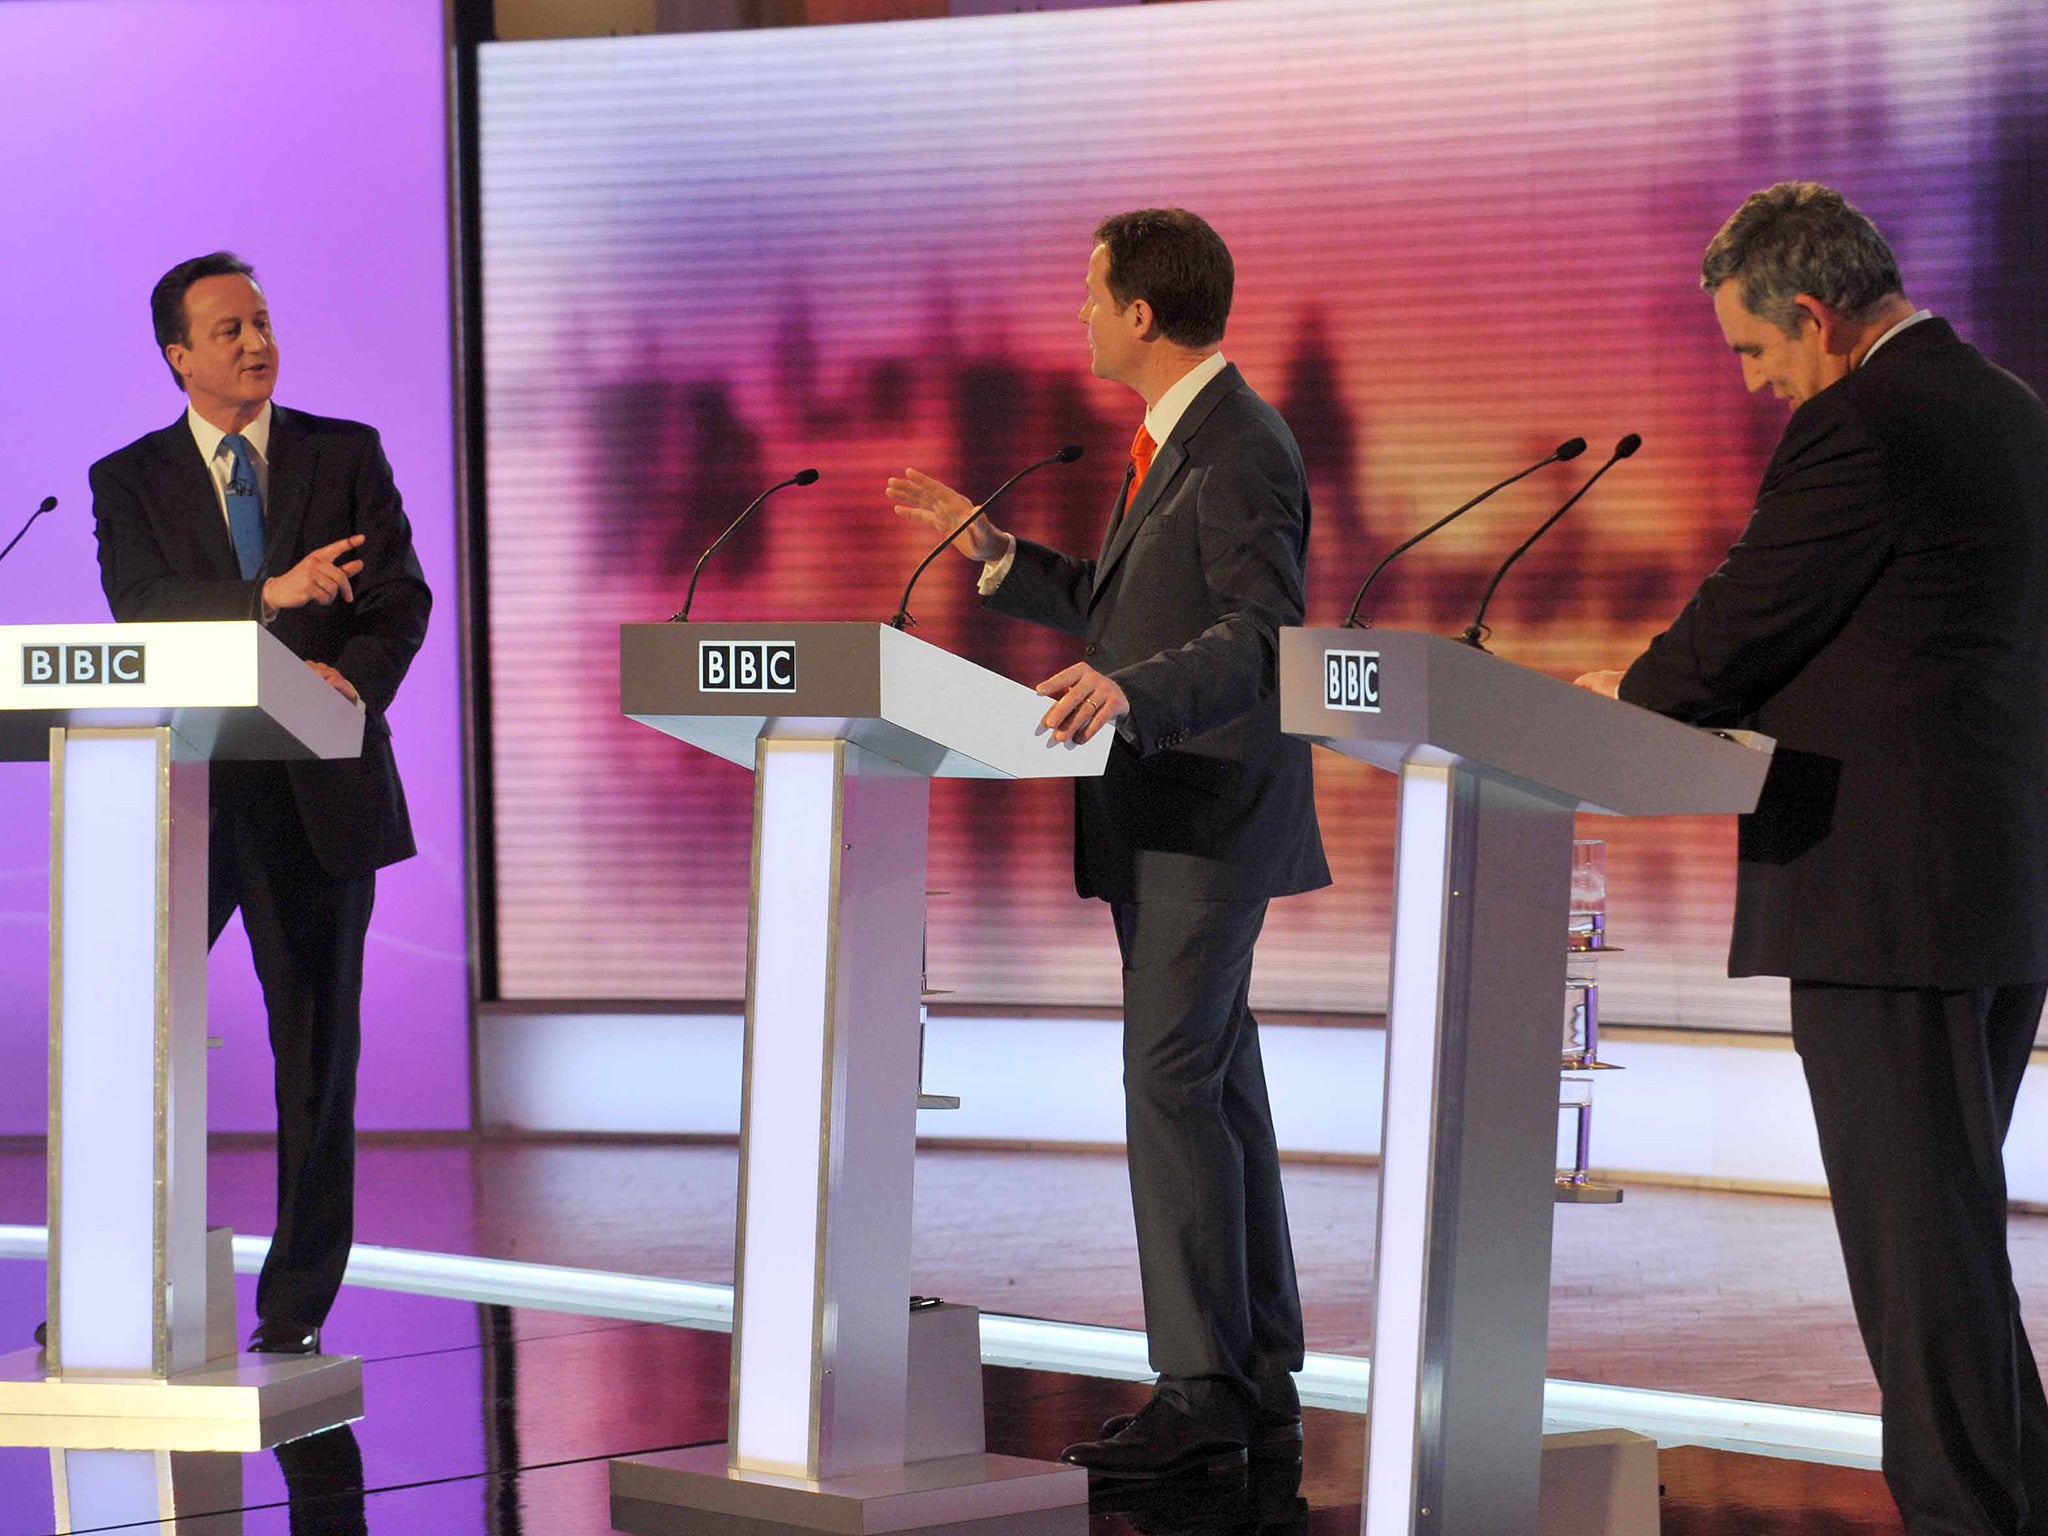 David Cameron,Nick Clegg and Gordon Brown debate during the third and final leader's debate in the lead up to the 2010 general election